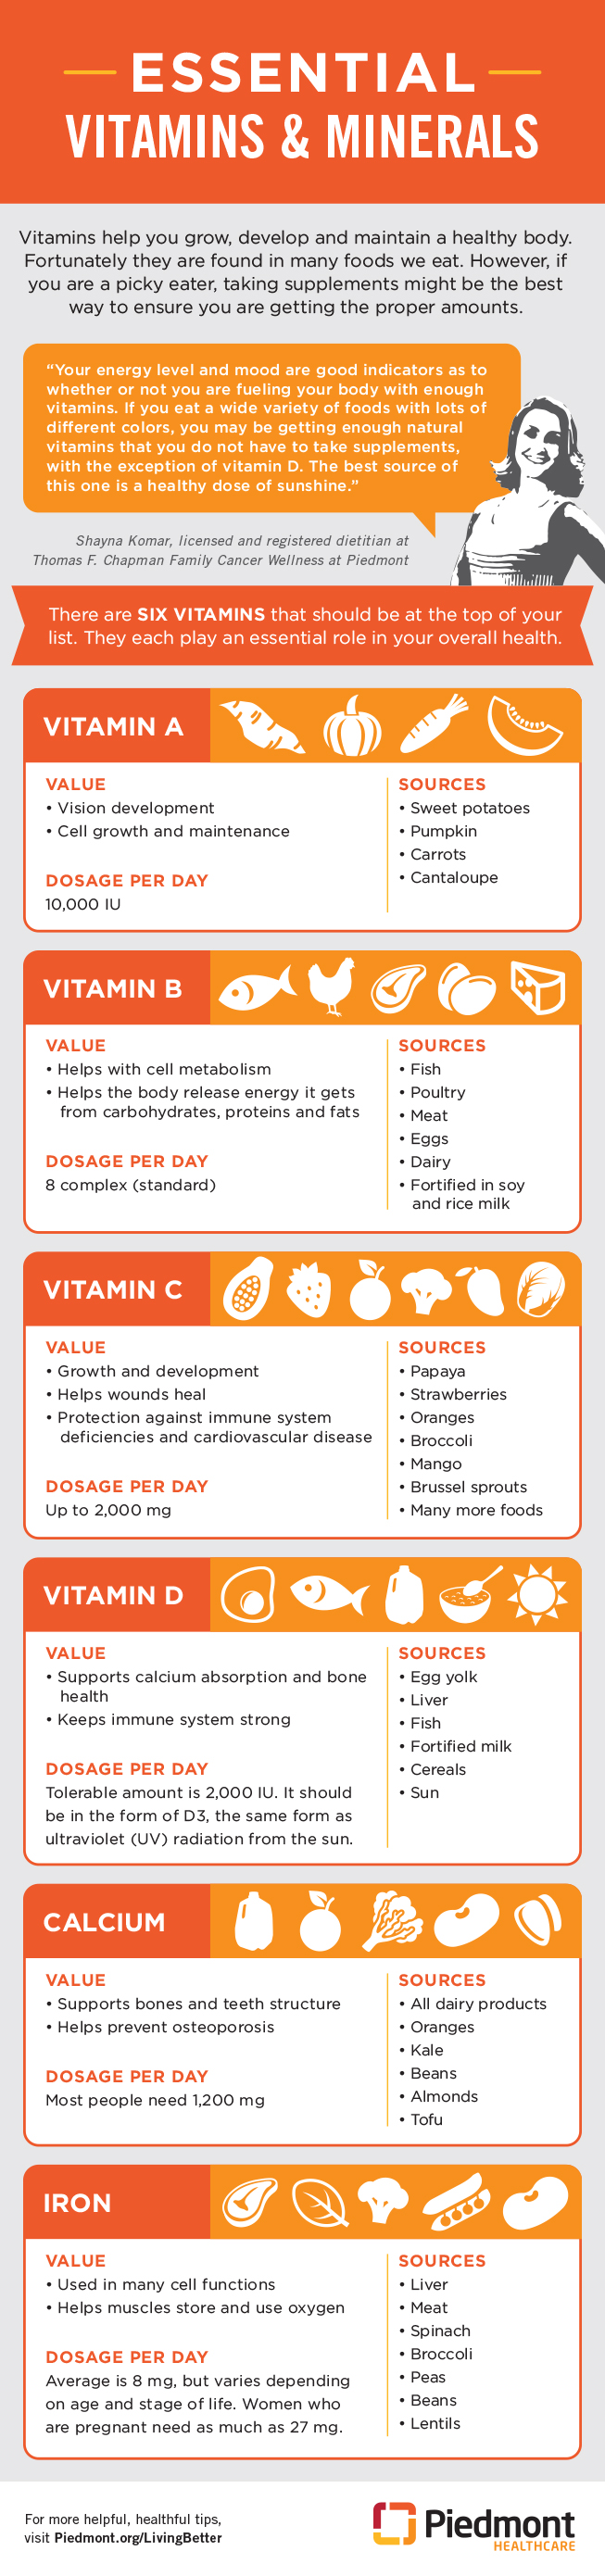 Essential vitamins and minerals graphic.